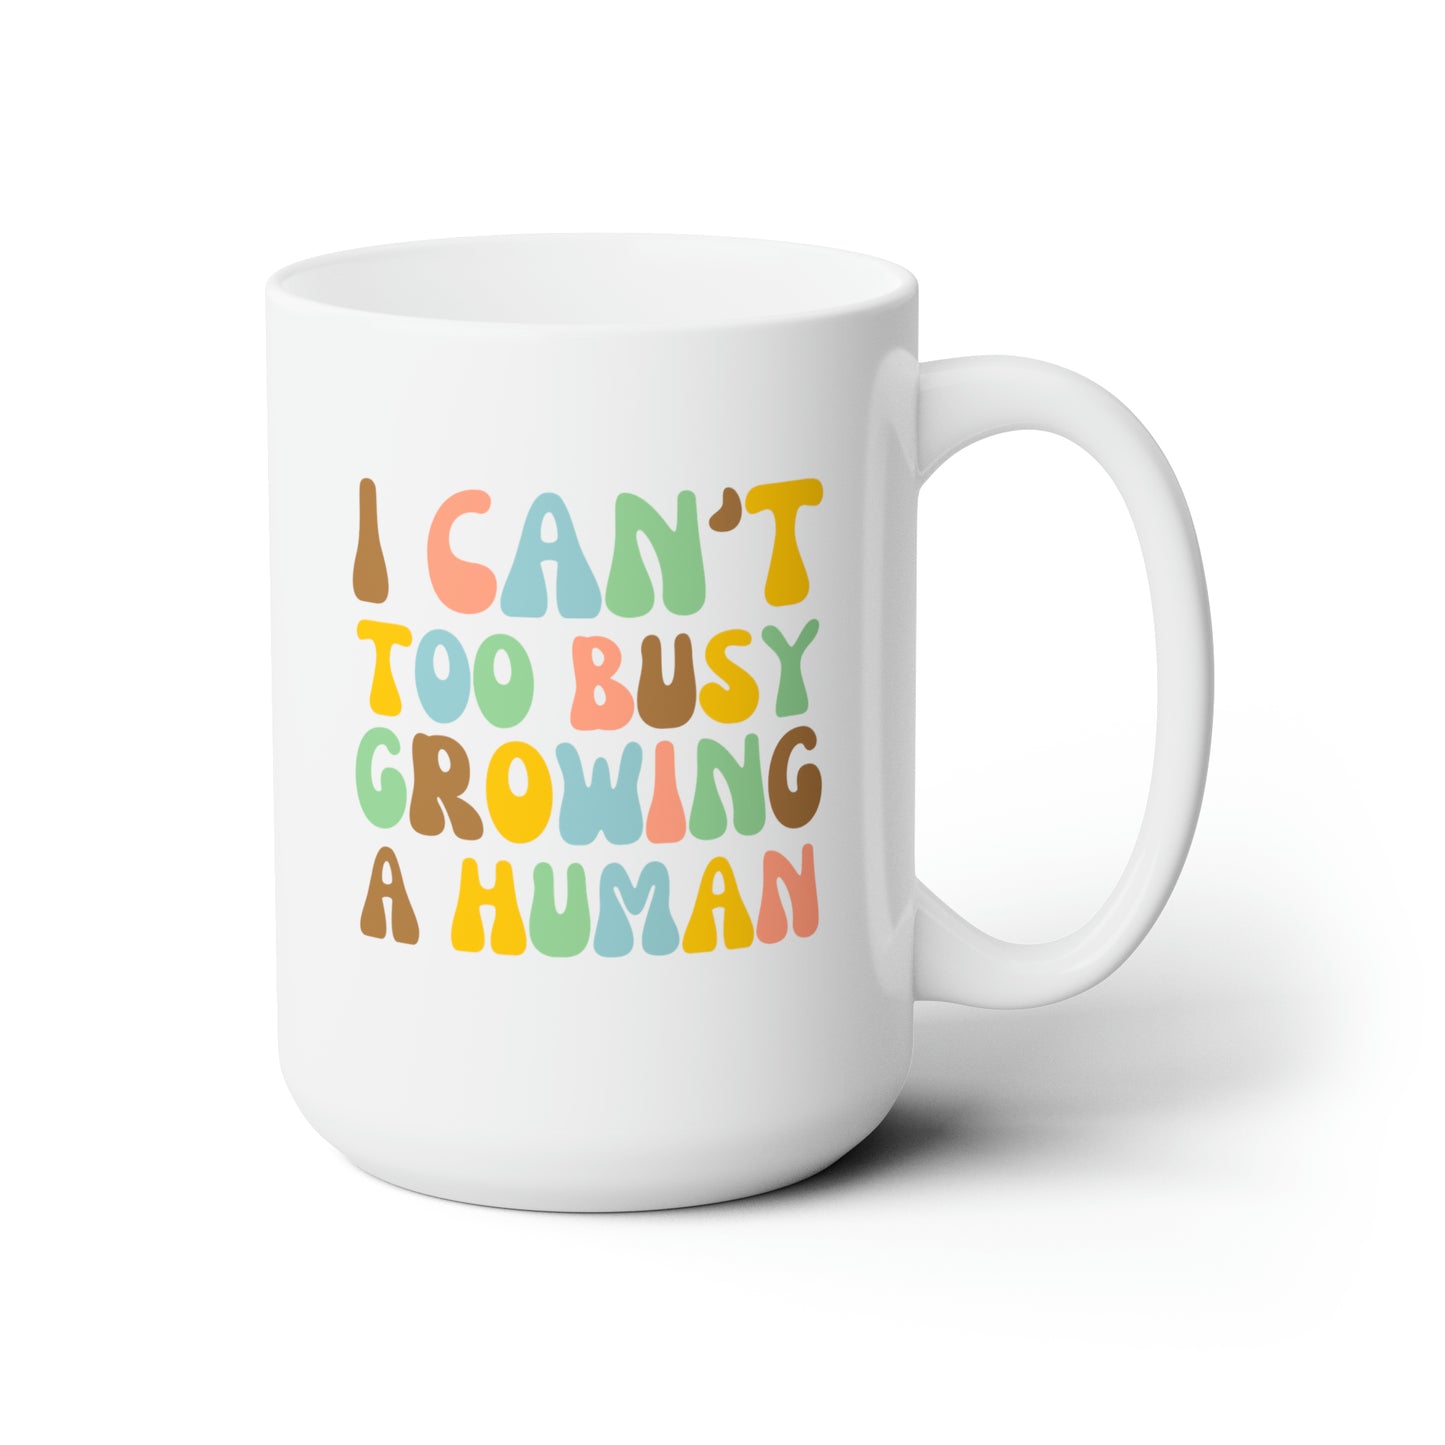 I Can't Too Busy Growing A Human 15oz white funny large coffee mug gift for pregnant woman pregnancy announcement mom to be baby bump shower waveywares wavey wares wavywares wavy wares